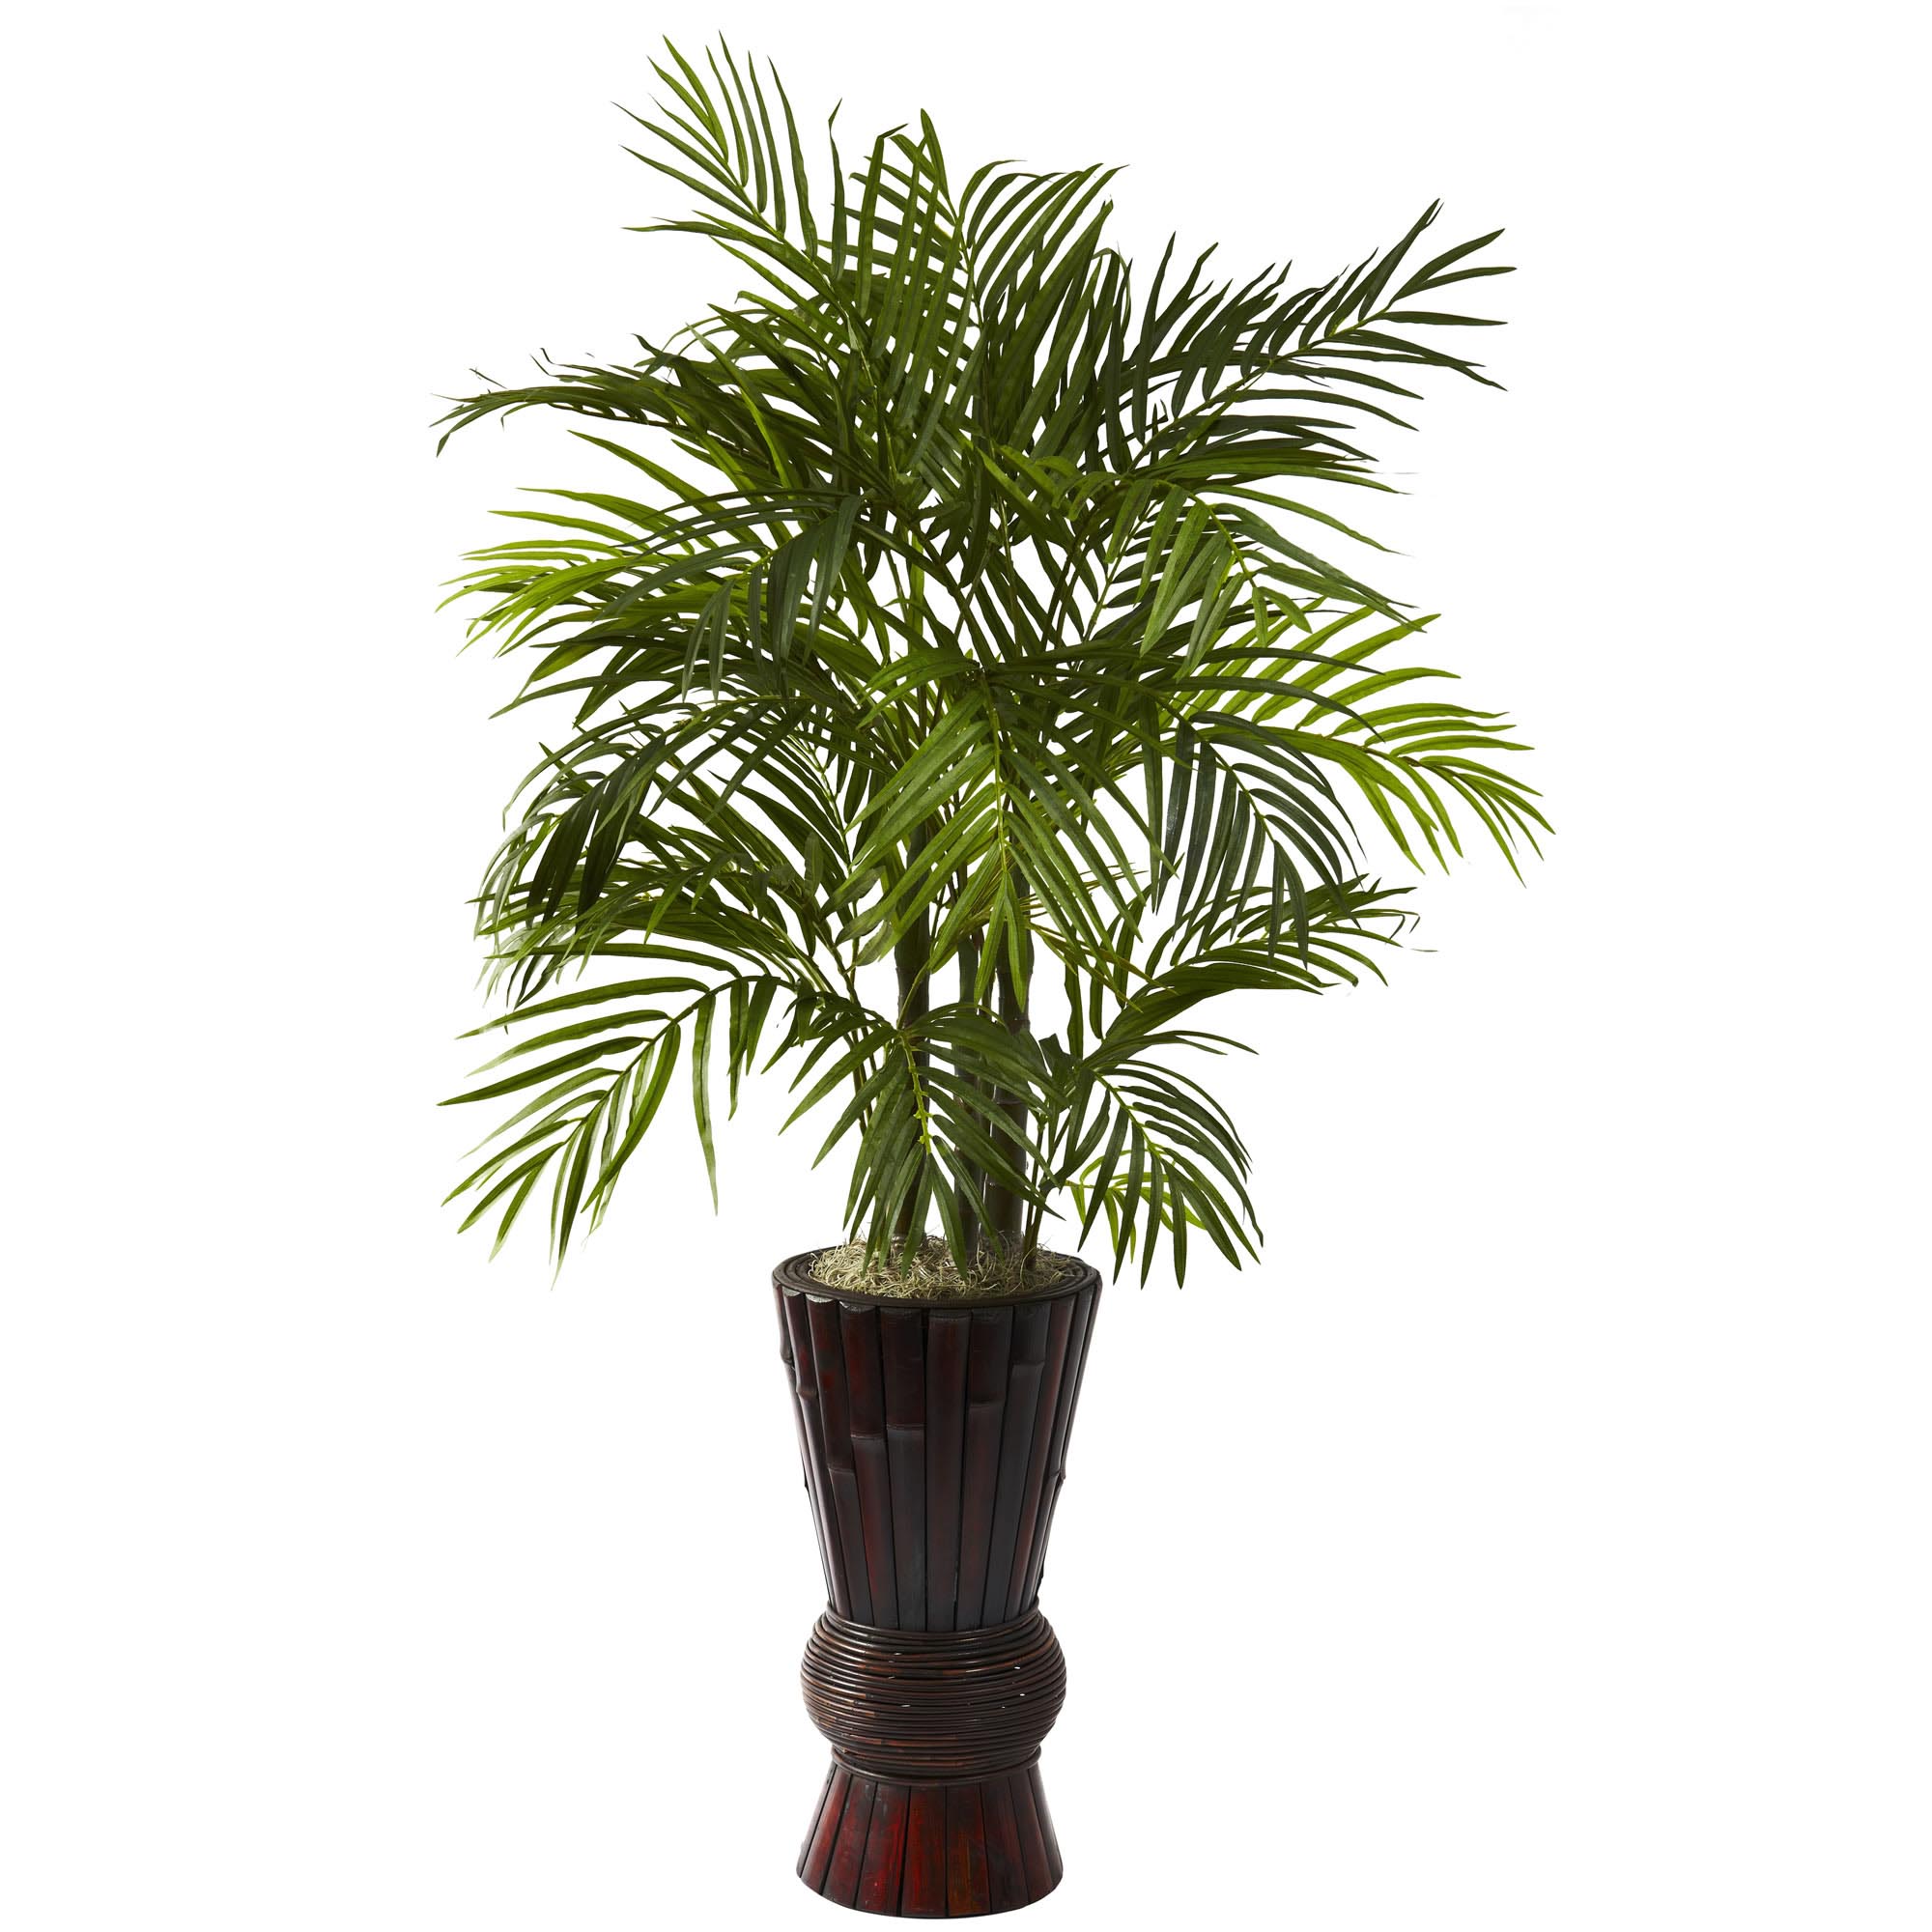 4 foot Artificial Areca Tree in Bamboo Planter